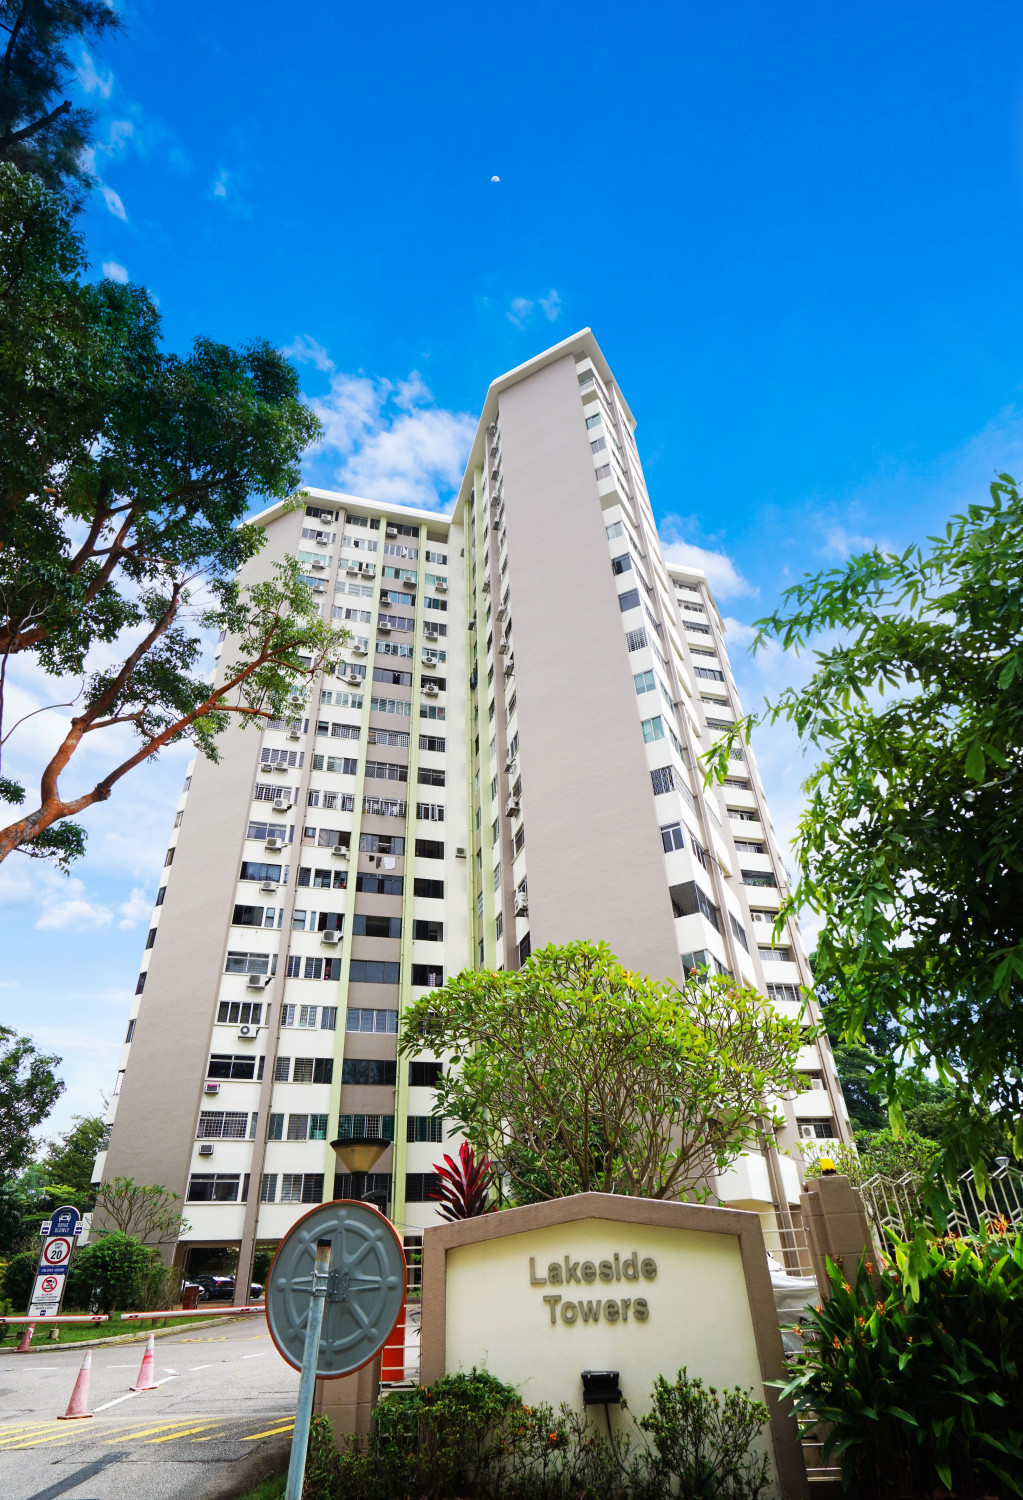 Lakeside Tower in Jurong East launches $350 mil collective sale - Property News